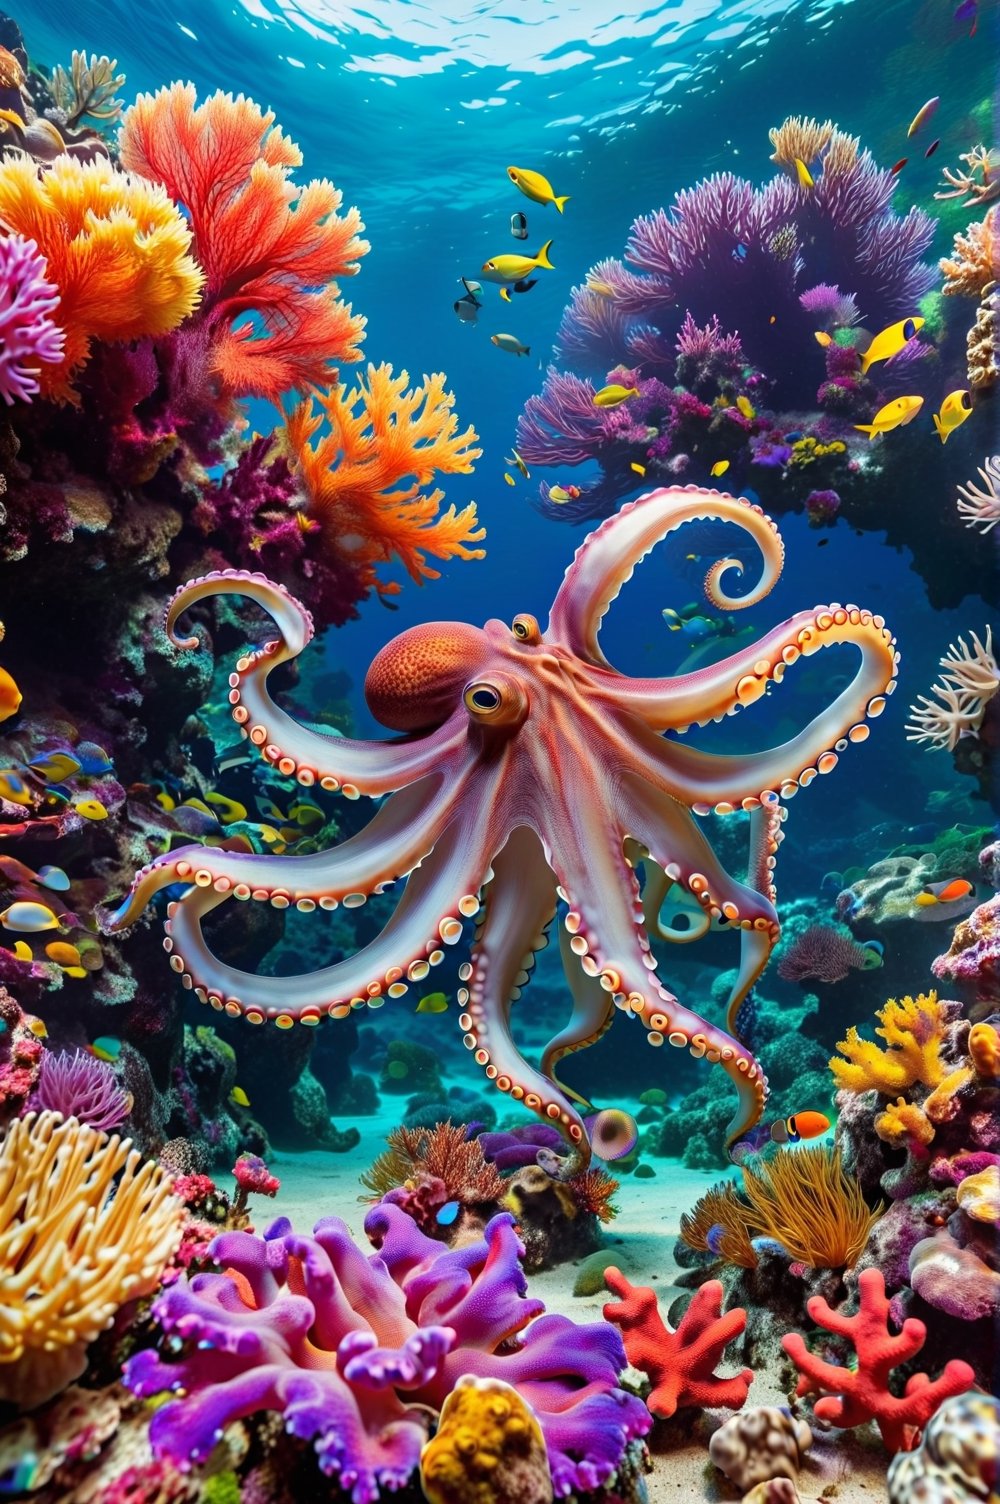 Photo of giant octopus at the bottom of the sea in its coral environment. School of colorful fish, natural aquatic environment, clear and clean waters. Extremely realistic. A memorable photo.